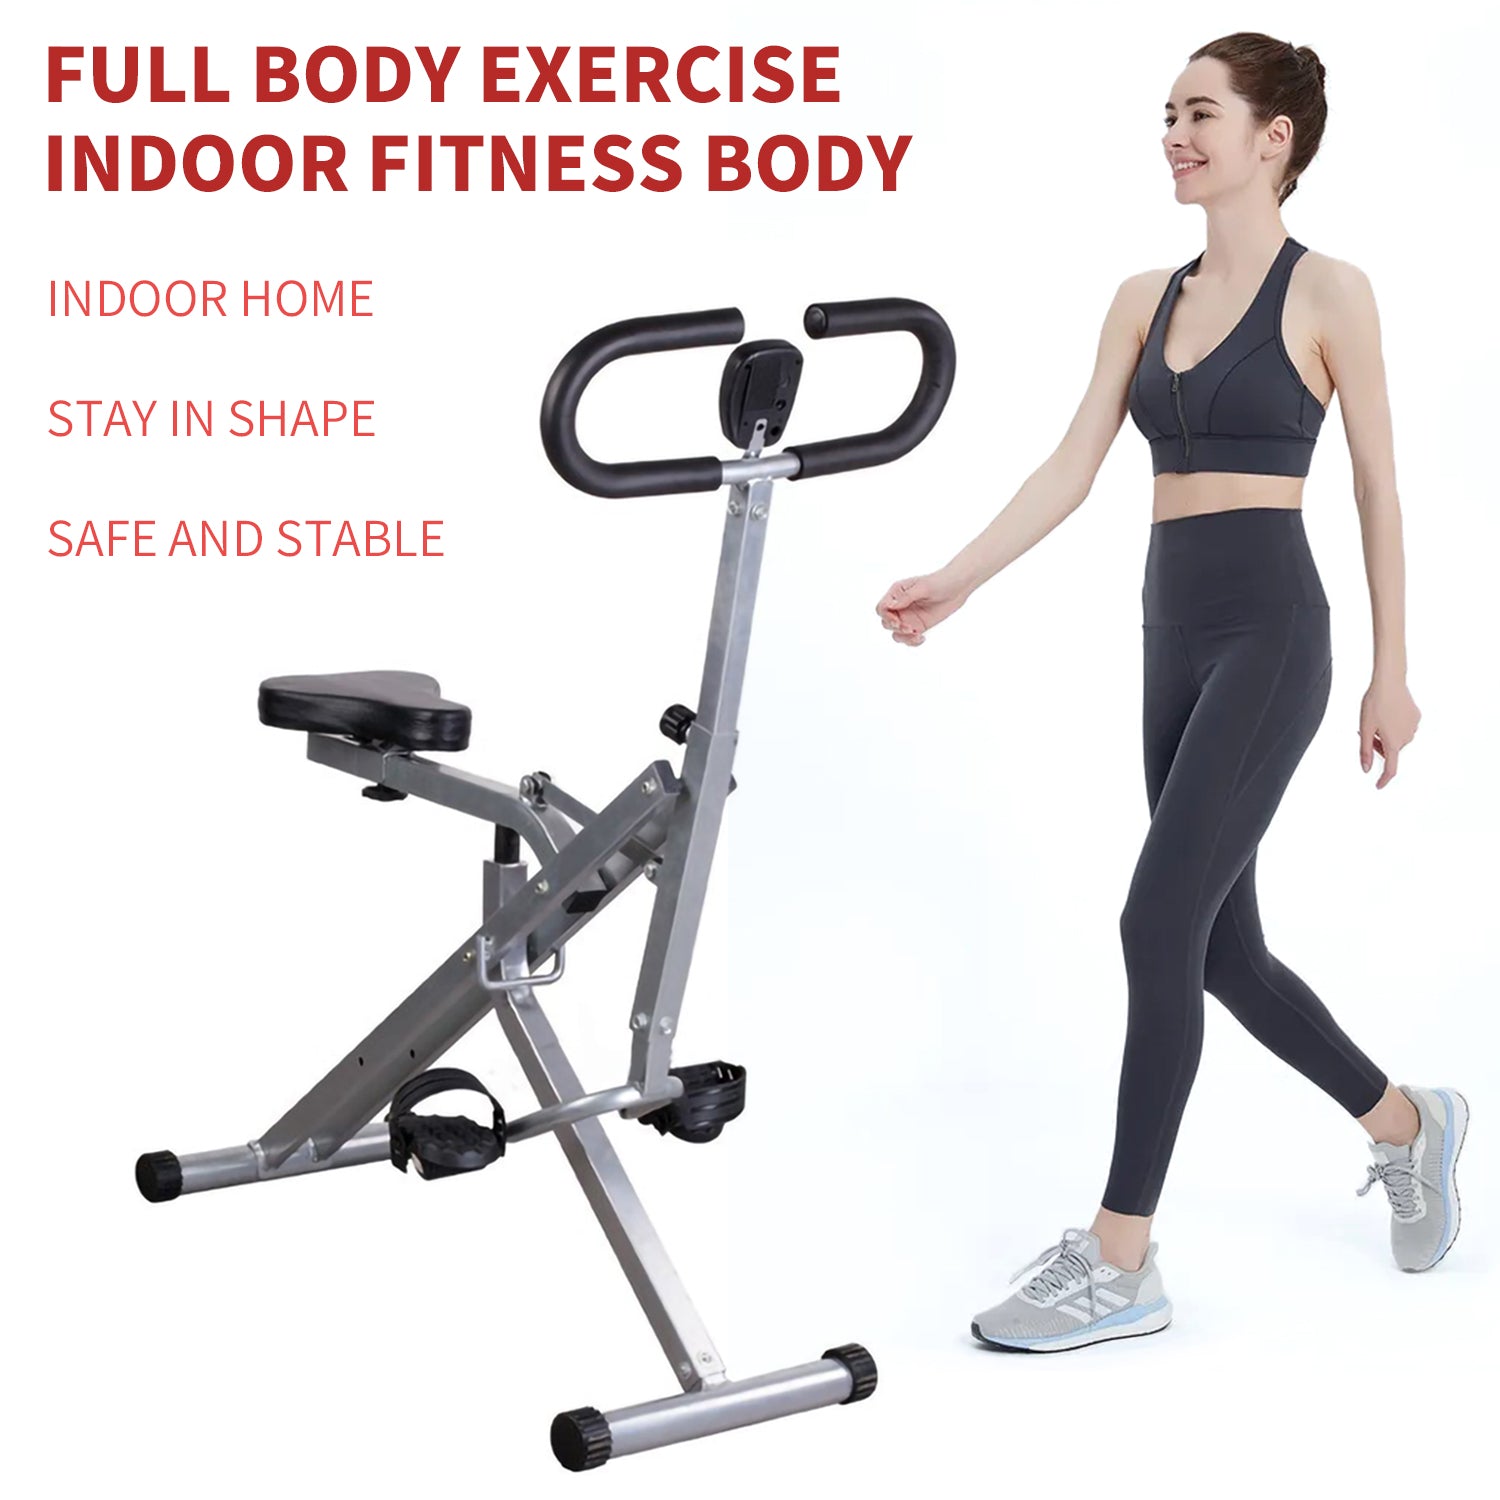 SUGIFT Squat Auxiliary Training Device, Abdominal Training Device, Can Exercise Waist, Hips, Thighs